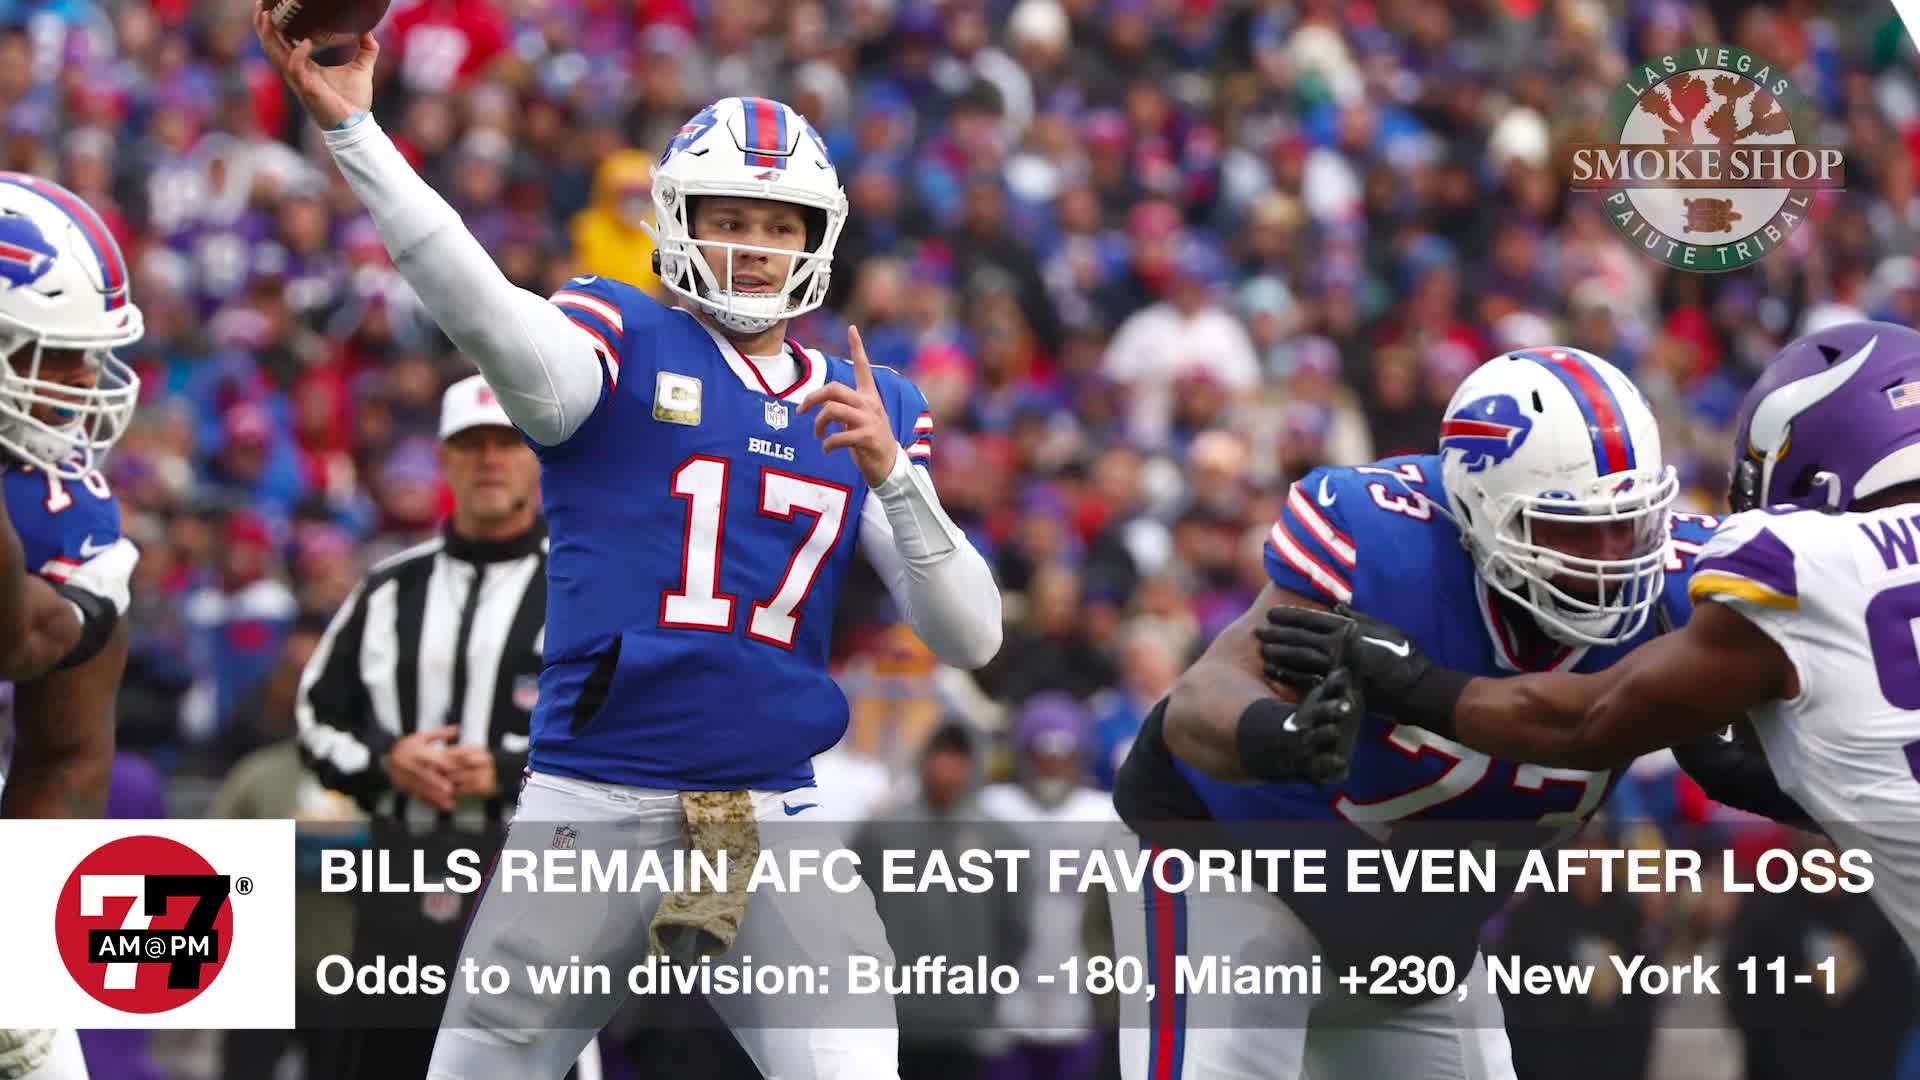 Bills favored to win AFC East